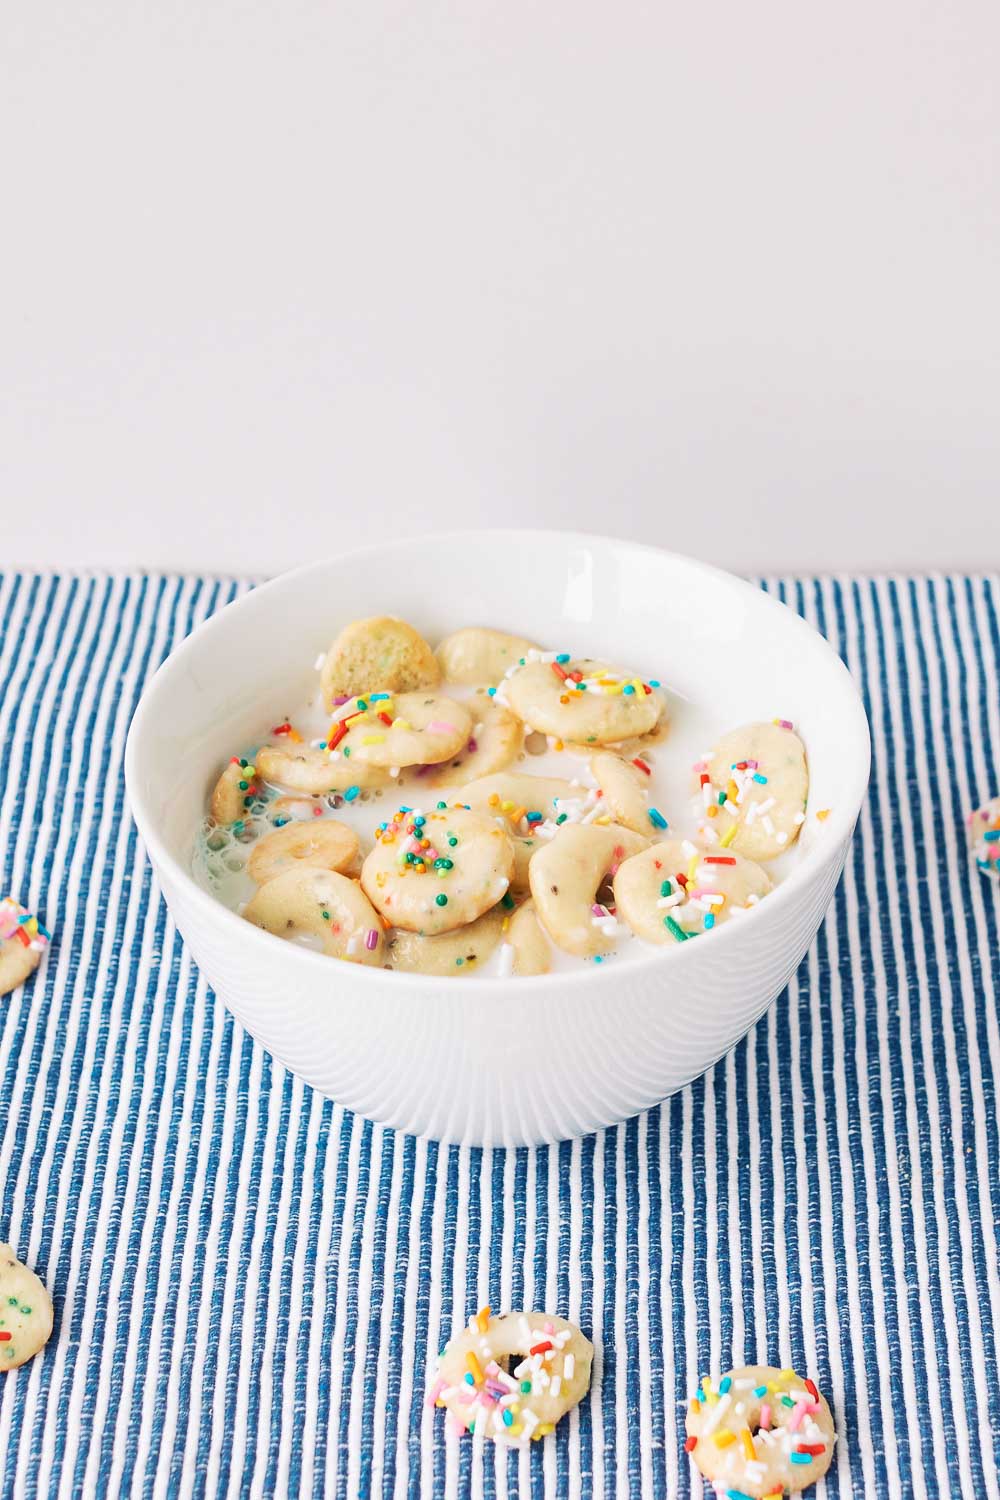 This recipe for baked mini donuts cereal is fun to make. They are definitely a delight for the eyes and I am sure it will be a delight for our palate too.